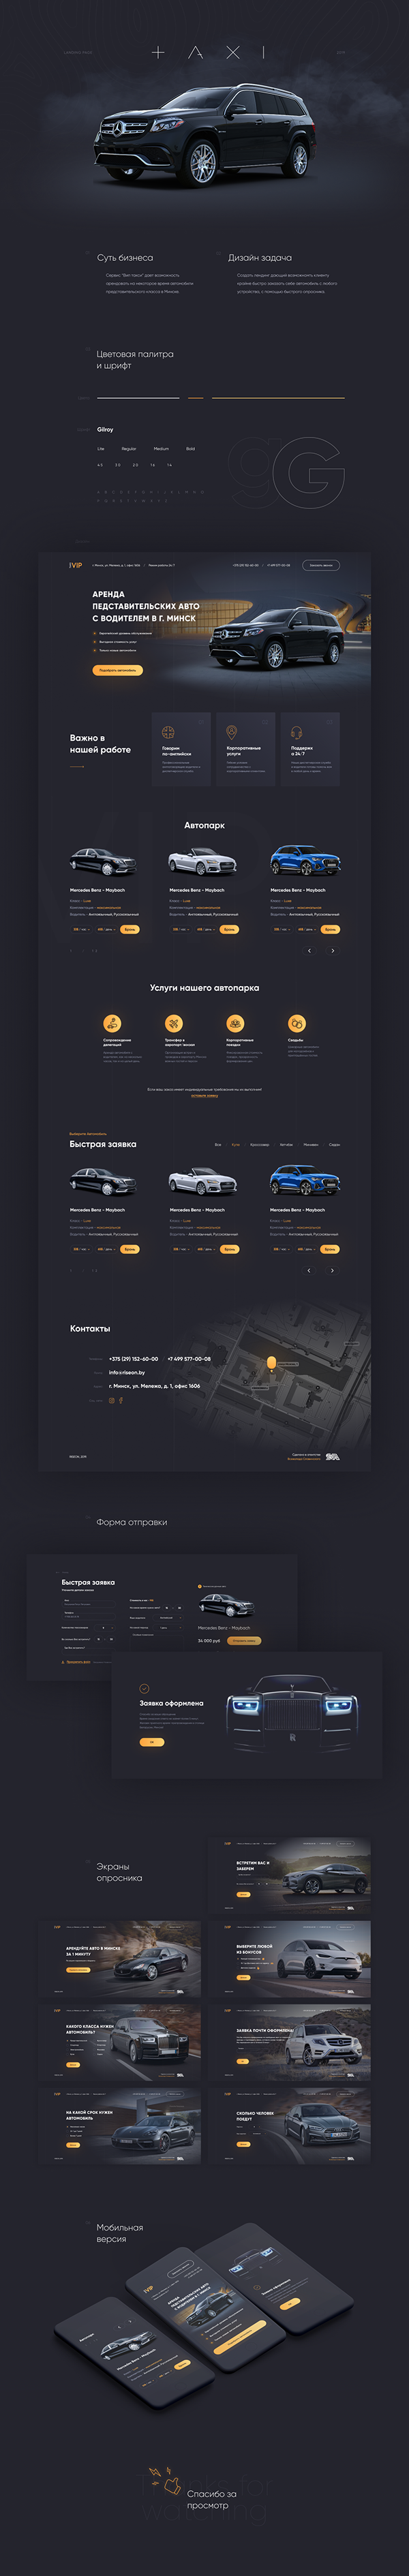 Minsk VIP taxi landing page